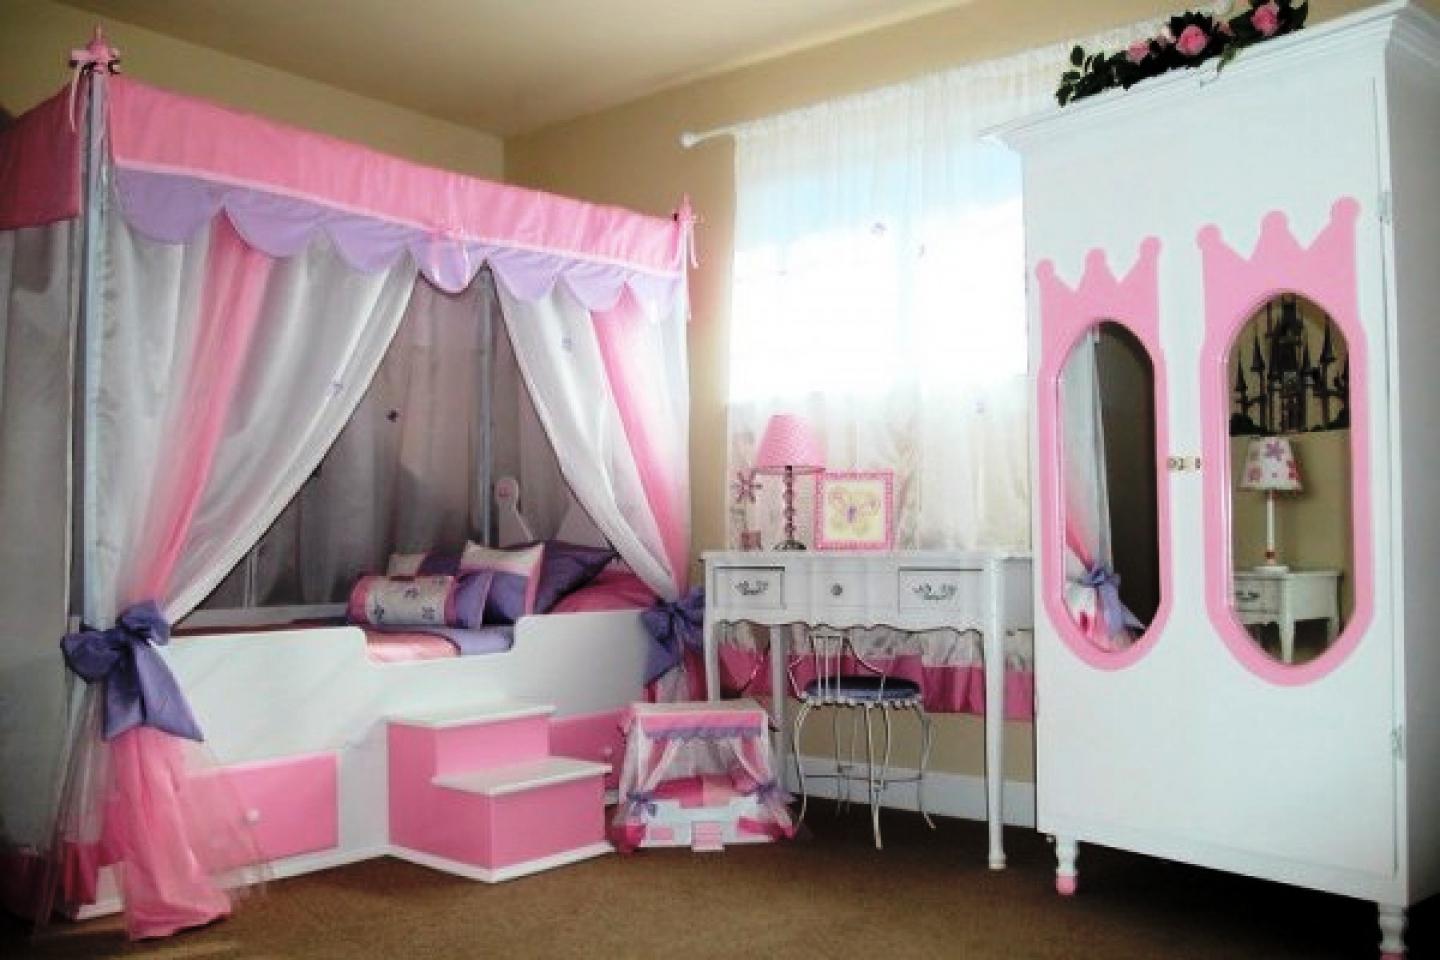 decorating a little girlﾒs room ideas photo - 10